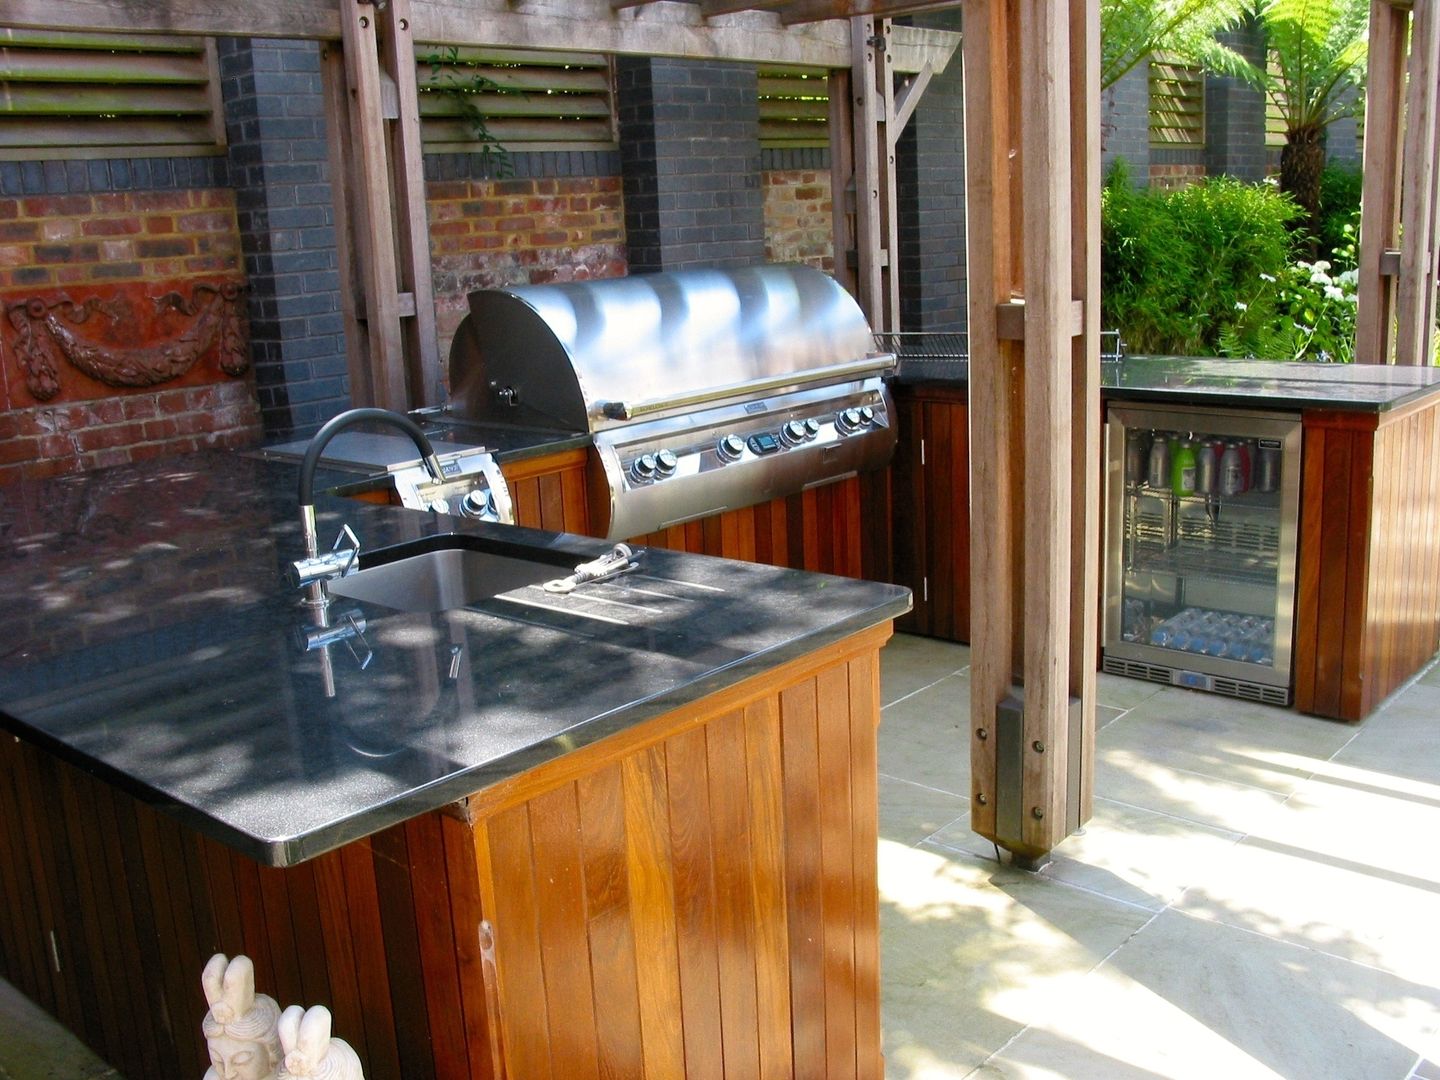 view of sink, BBQ and fridge wood-fired oven 庭院